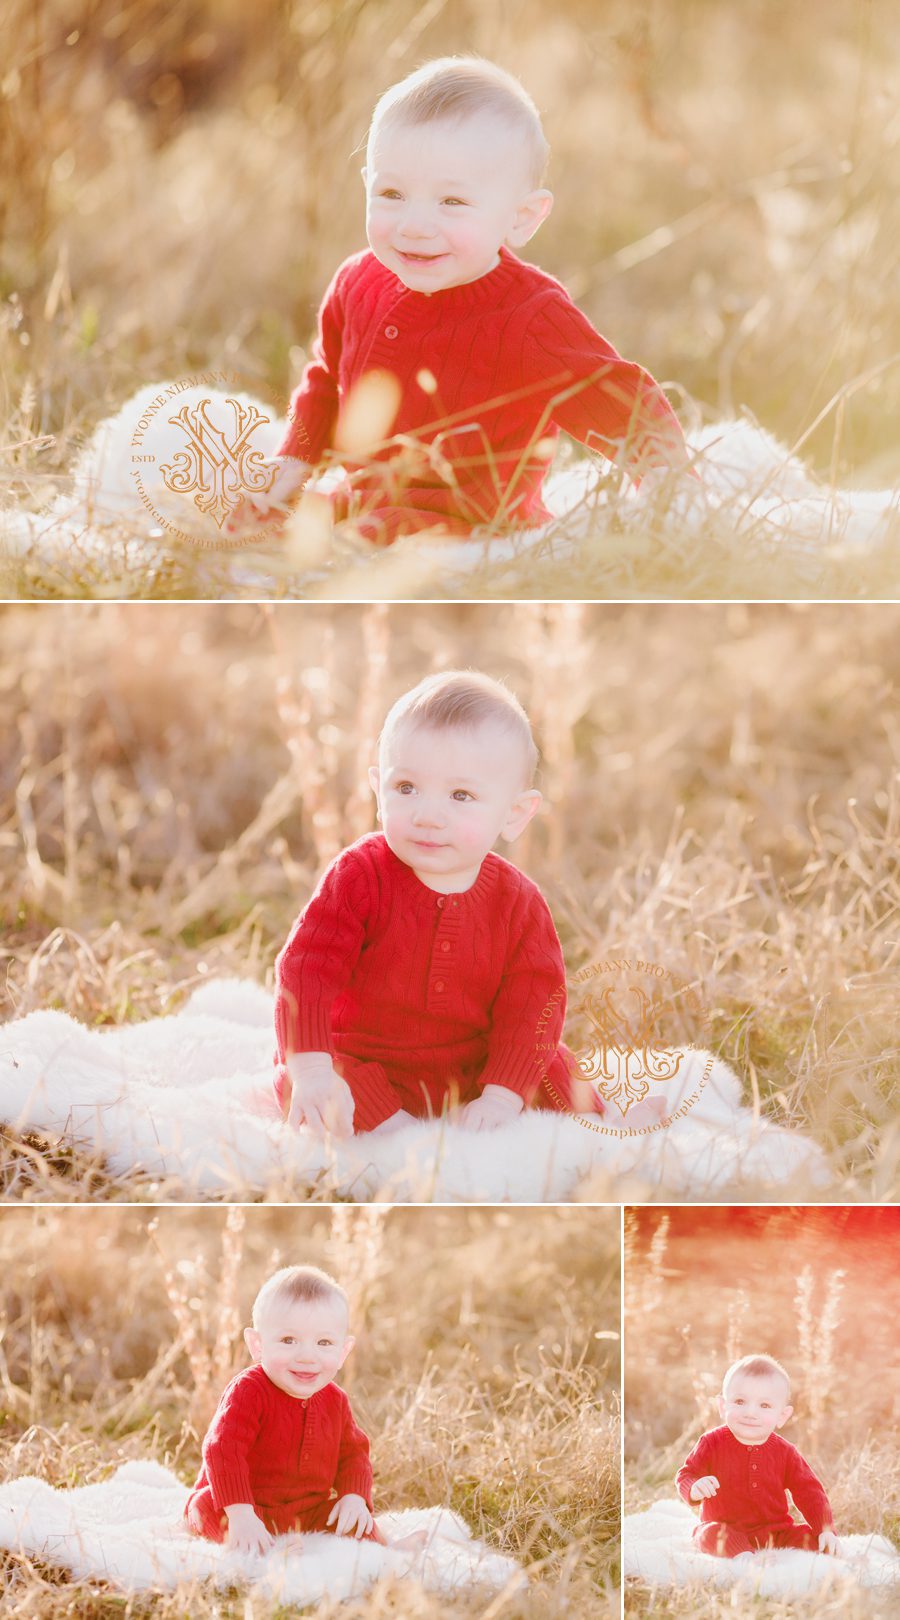 Winter Watkinsville baby photography of a 9 mos old baby boy in red sweater romper.